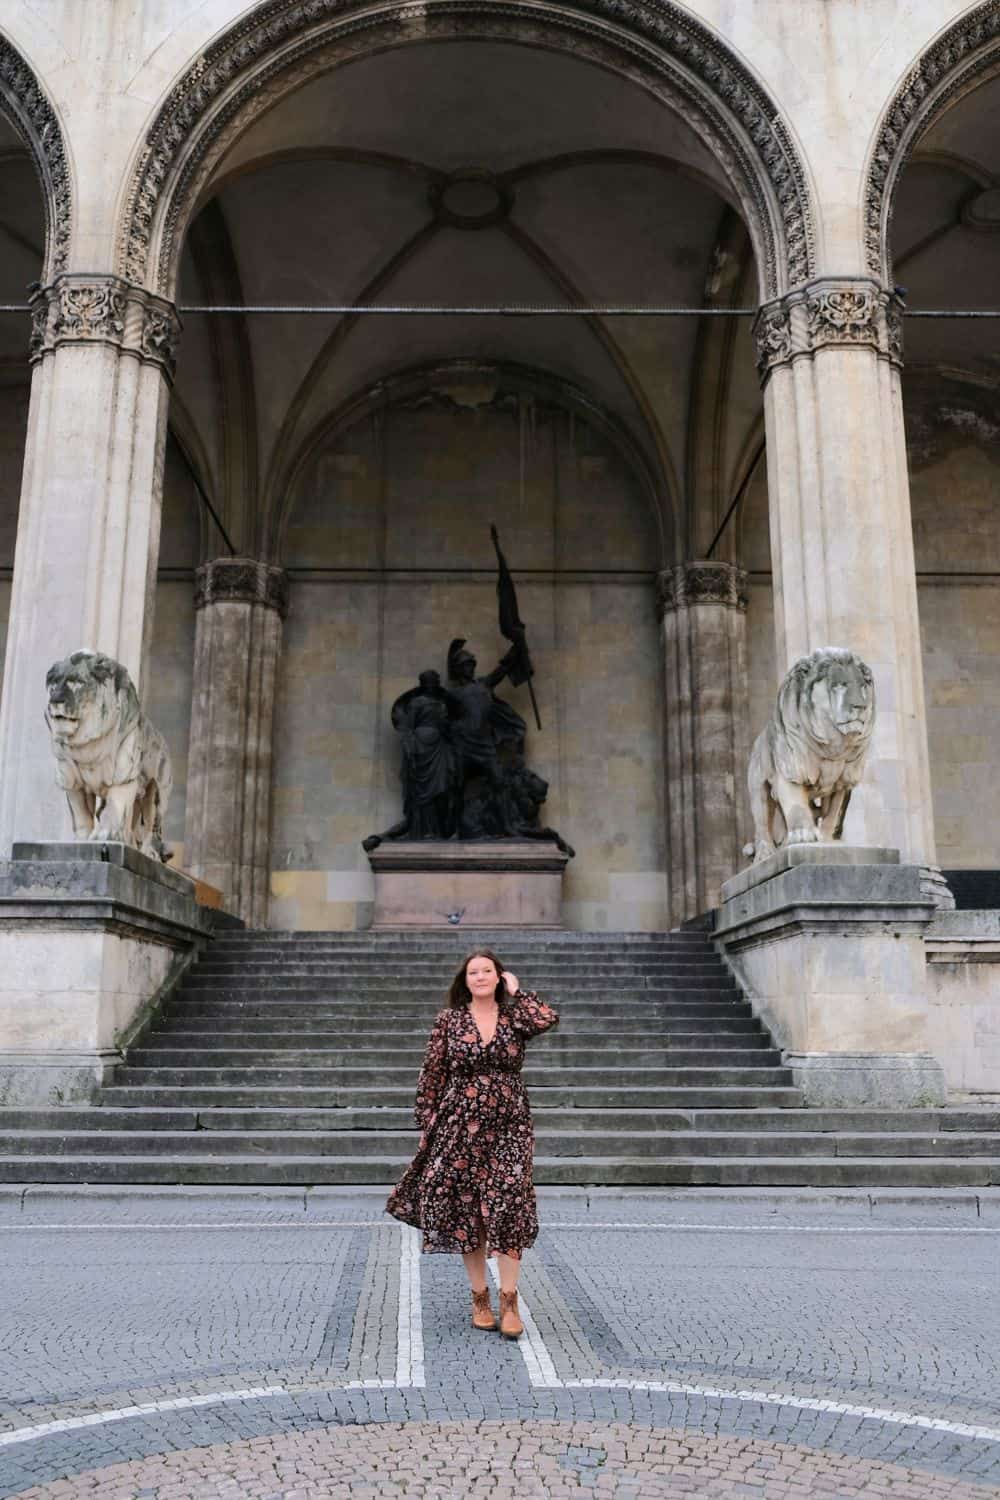 A woman in a floral dress stands before the majestic Feldherrnhalle in Munich, framed by historic statues and architecture, an iconic site for visitors.